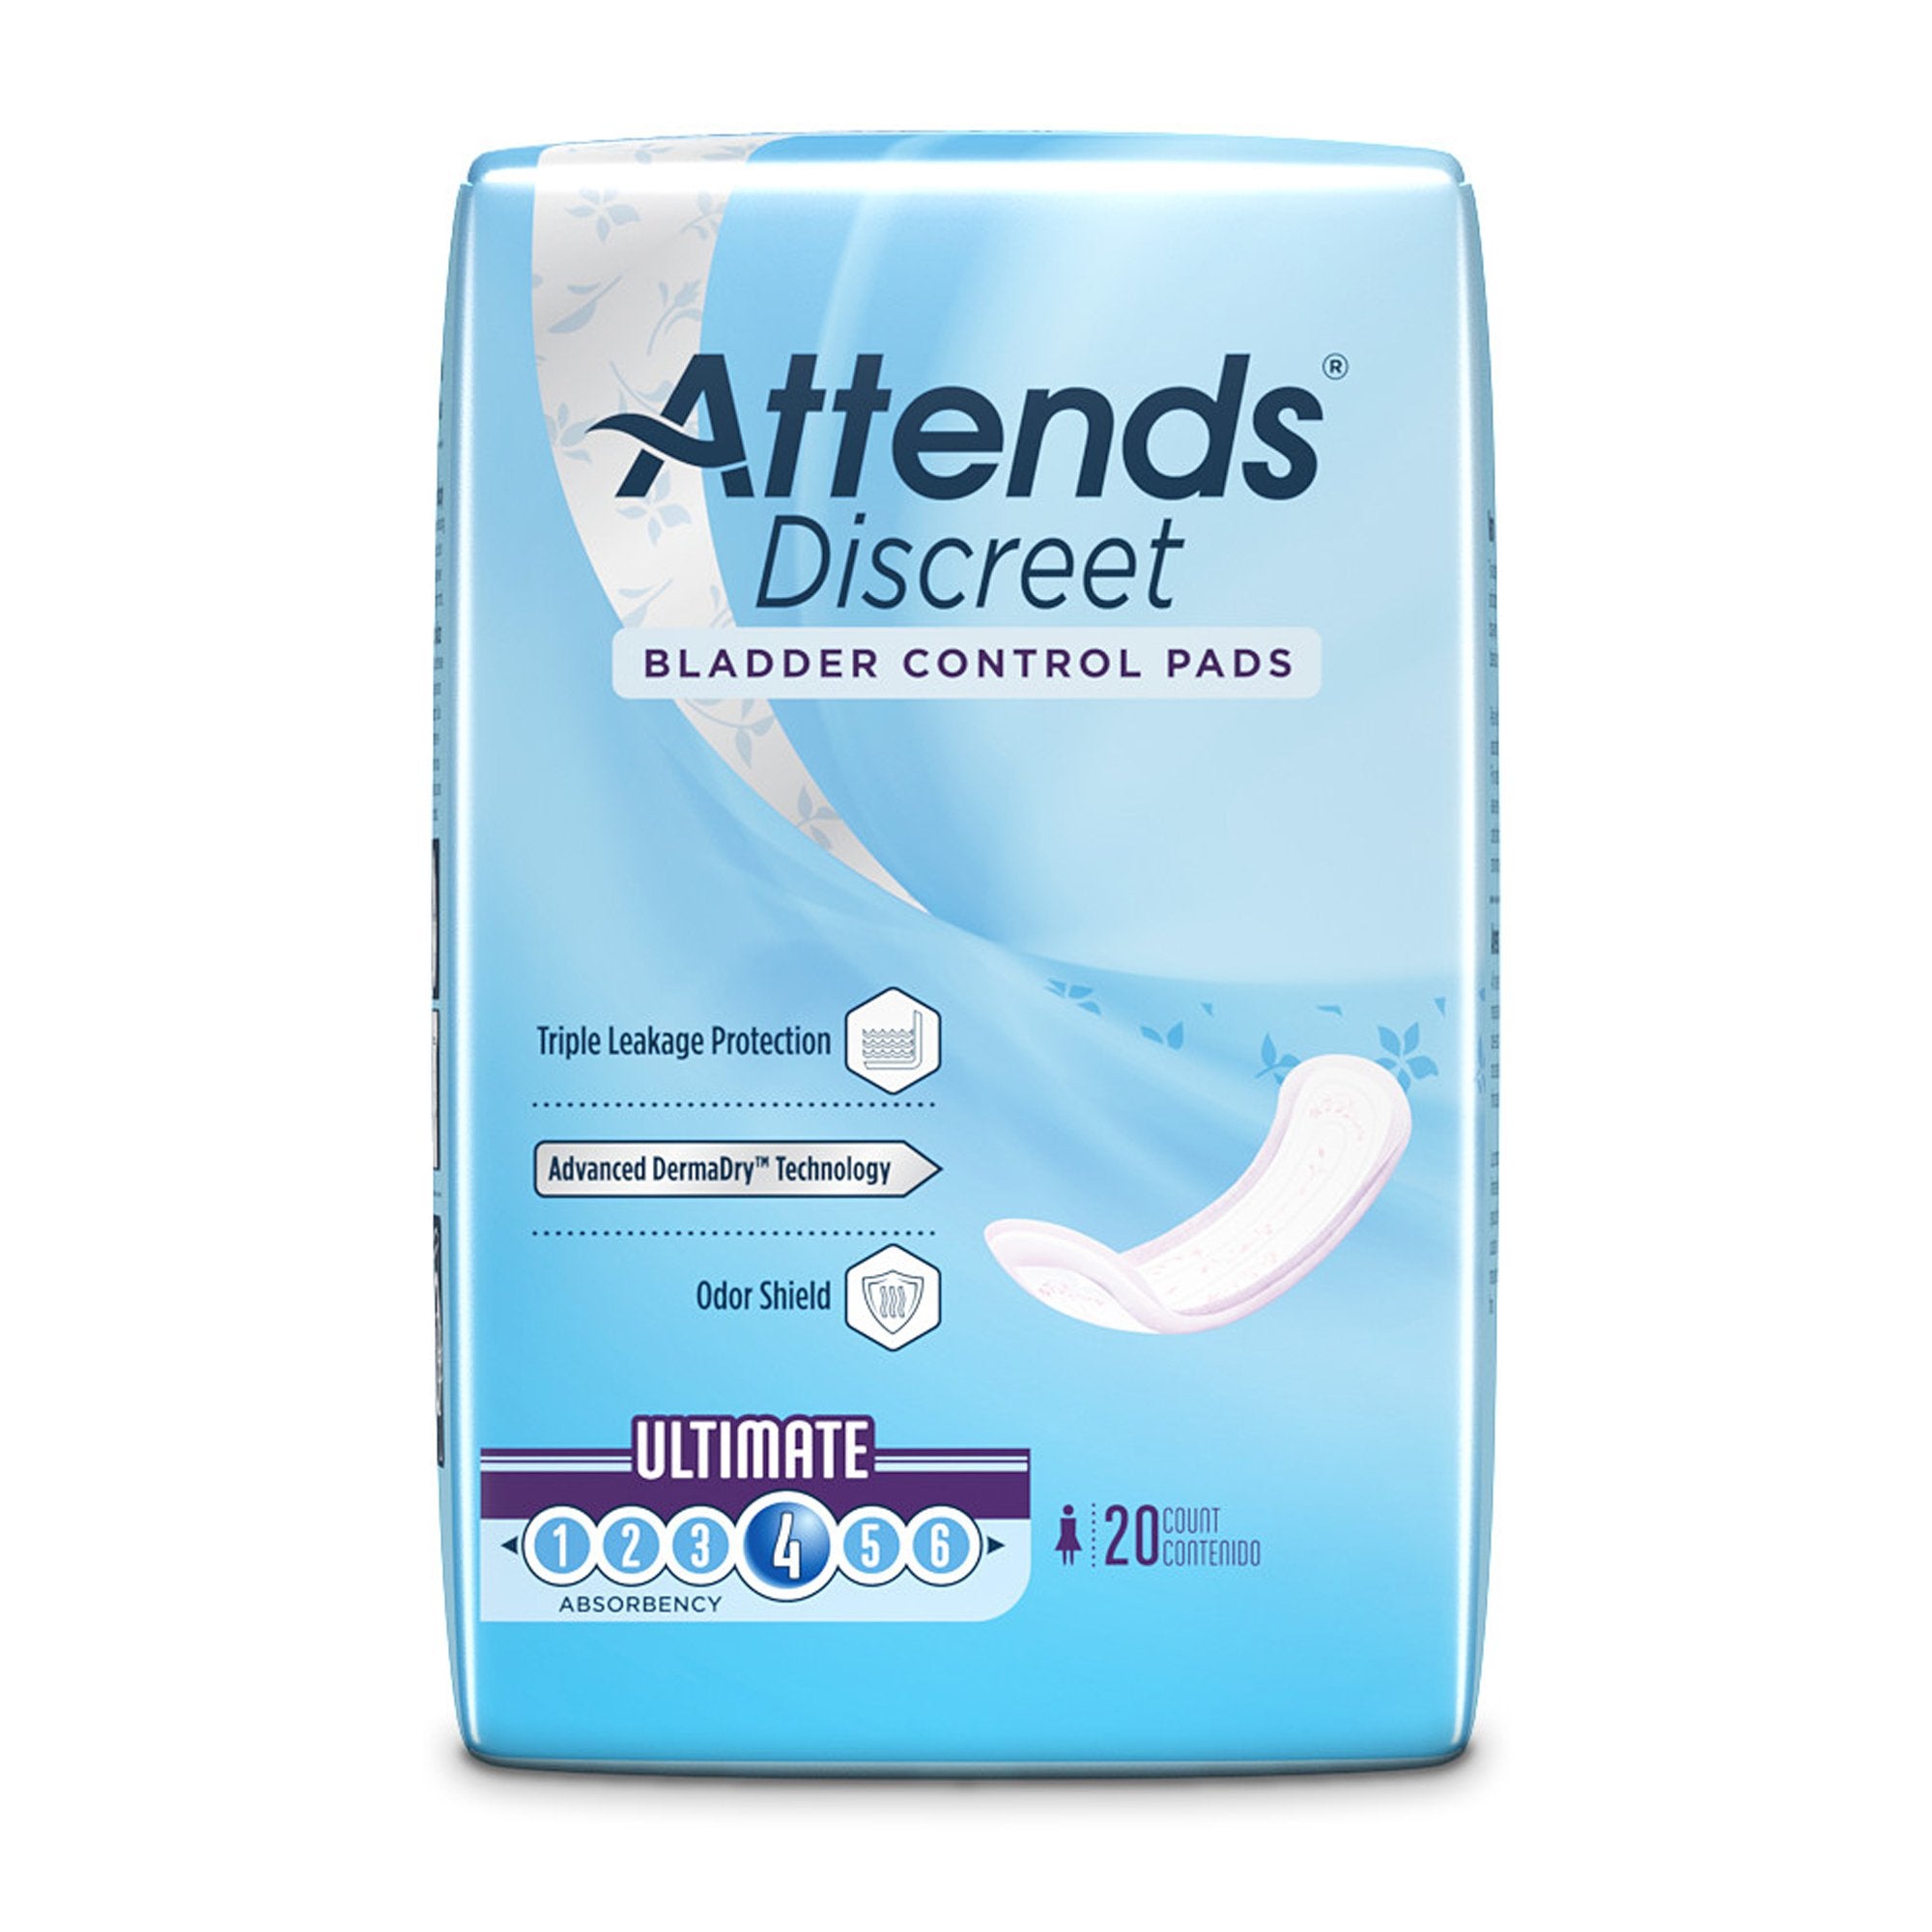 Bladder Control Pad Attends® Discreet 15 Inch Length Moderate Absorbency Polymer Core One Size Fits Most